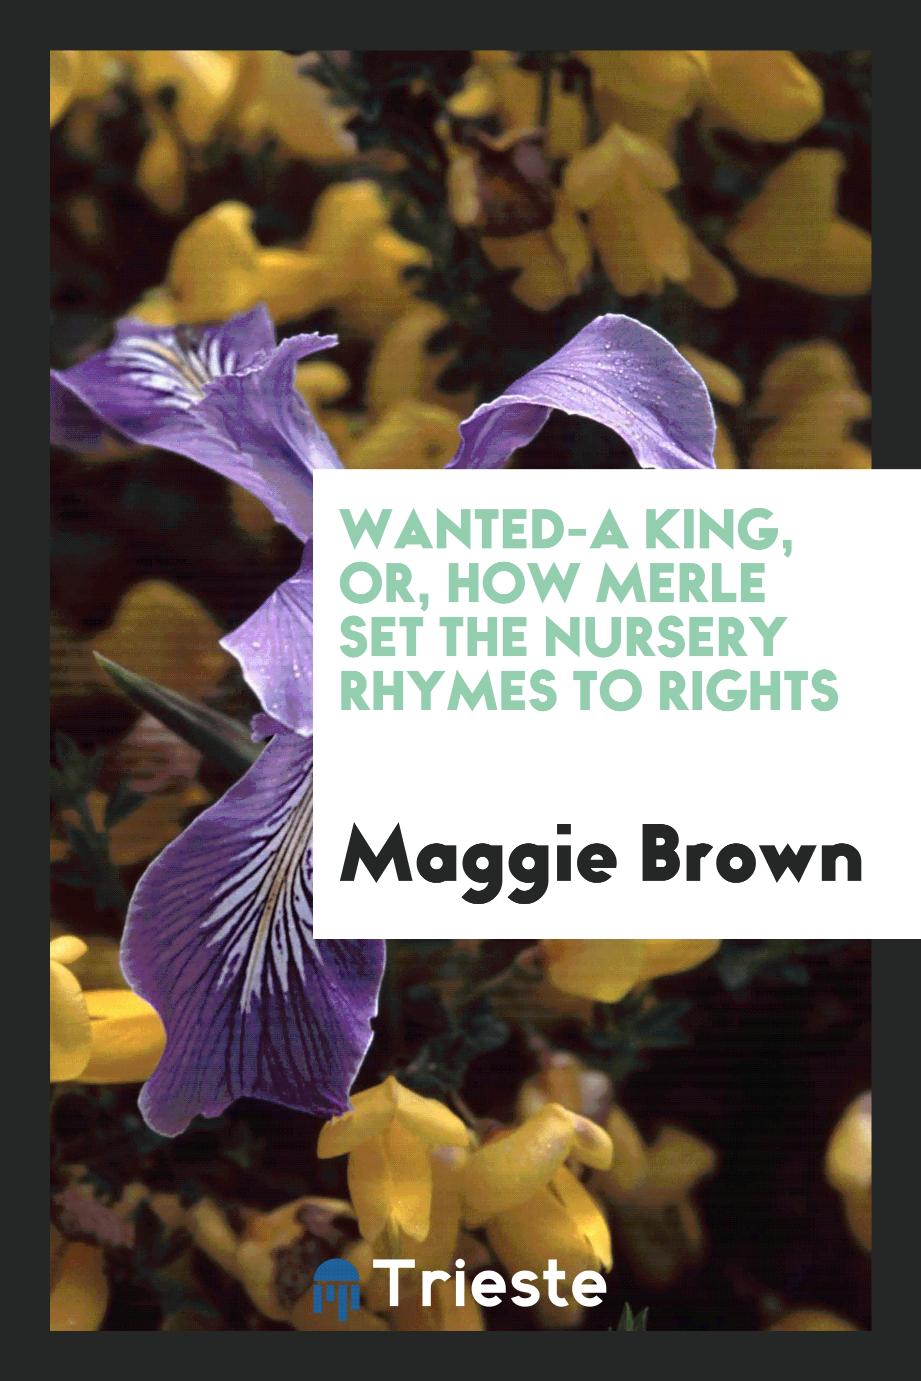 Wanted-a king, or, how Merle set the nursery rhymes to Rights